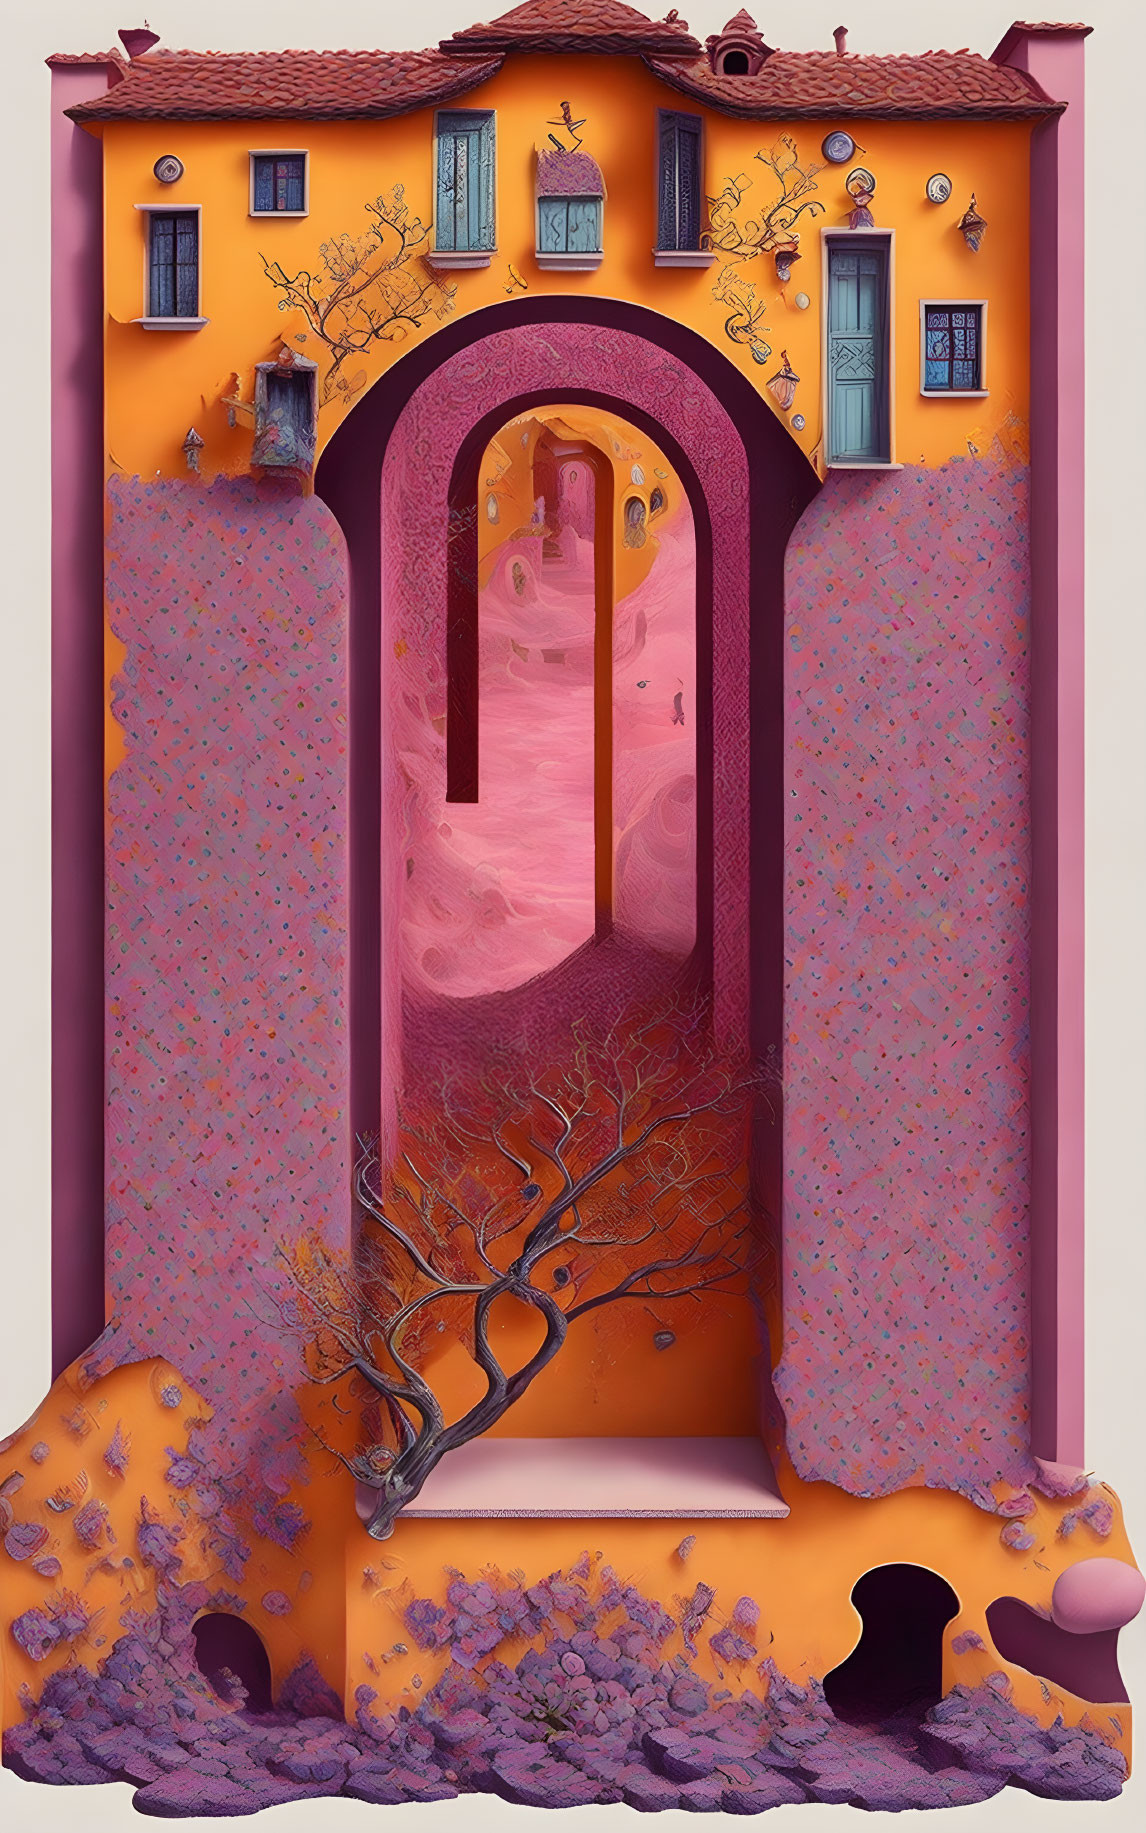 Surreal orange house with pink interior, arch frame, tree branches, purple foliage